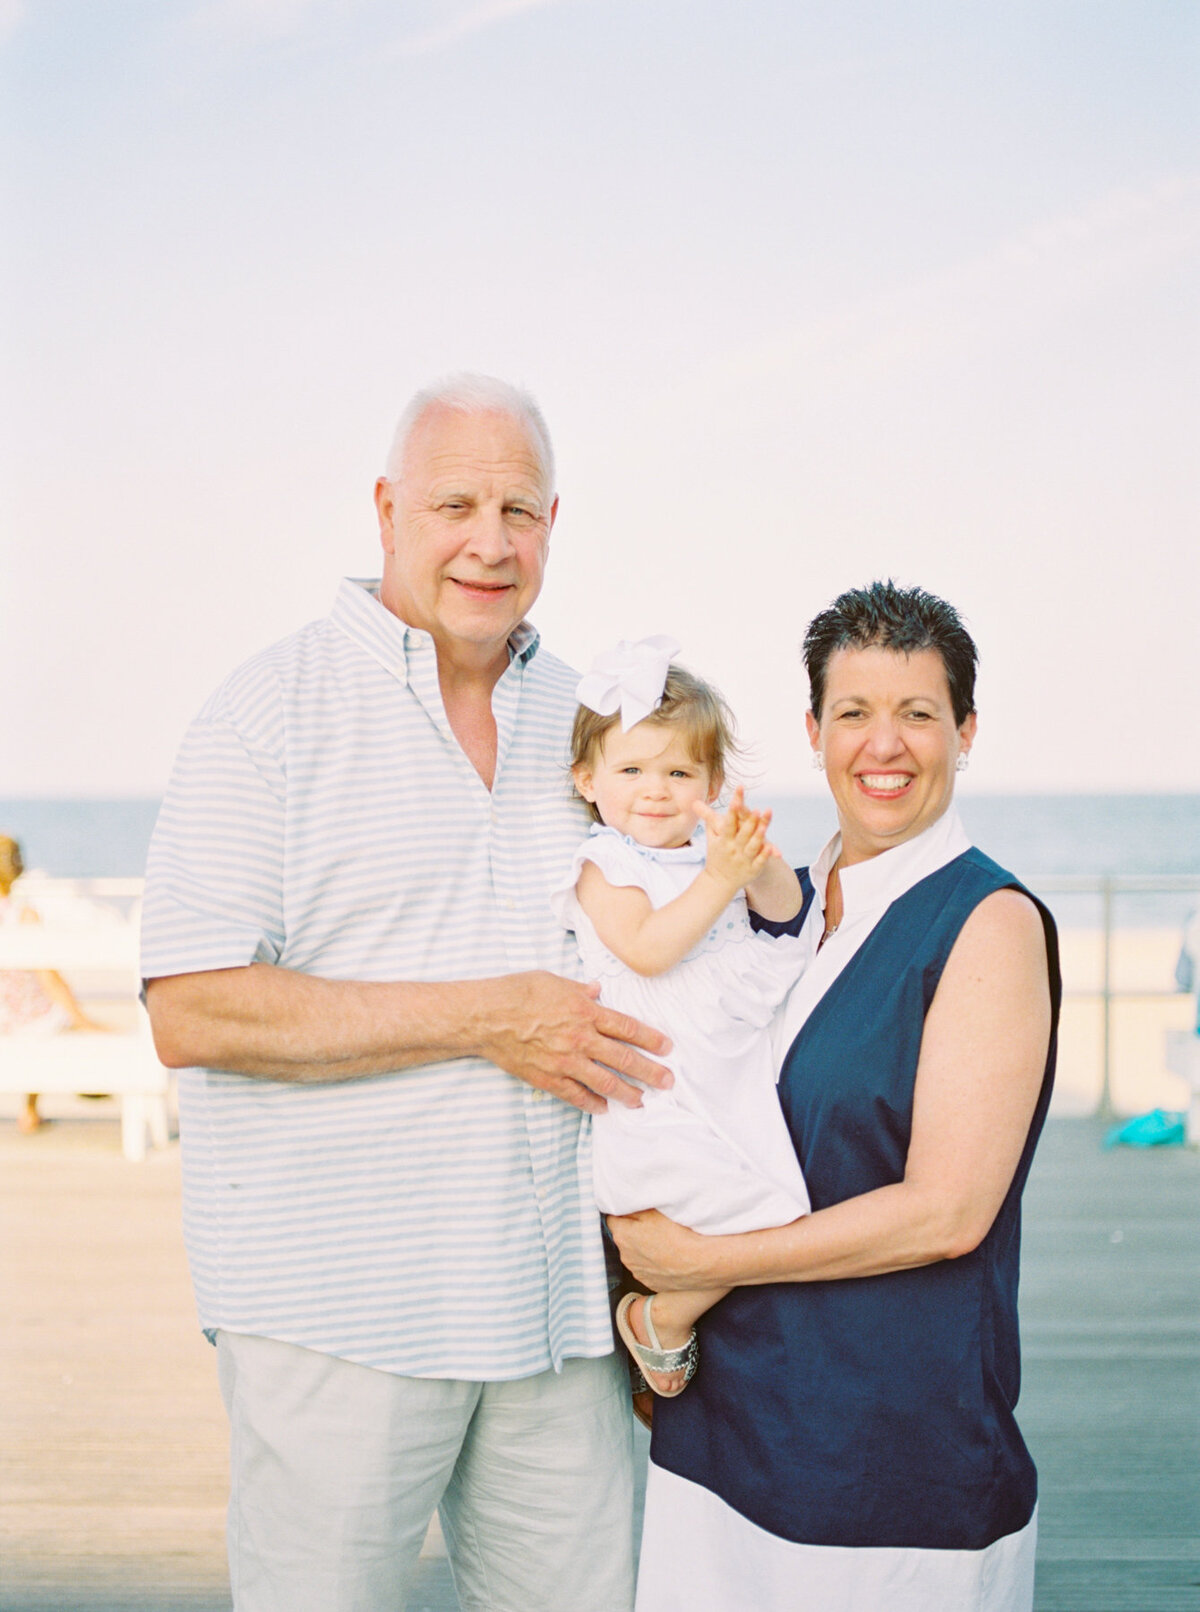 Michelle Behre Photography NJ Fine Art Photographer Seaside Family Lifestyle Family Portrait Session in Avon-by-the-Sea-96